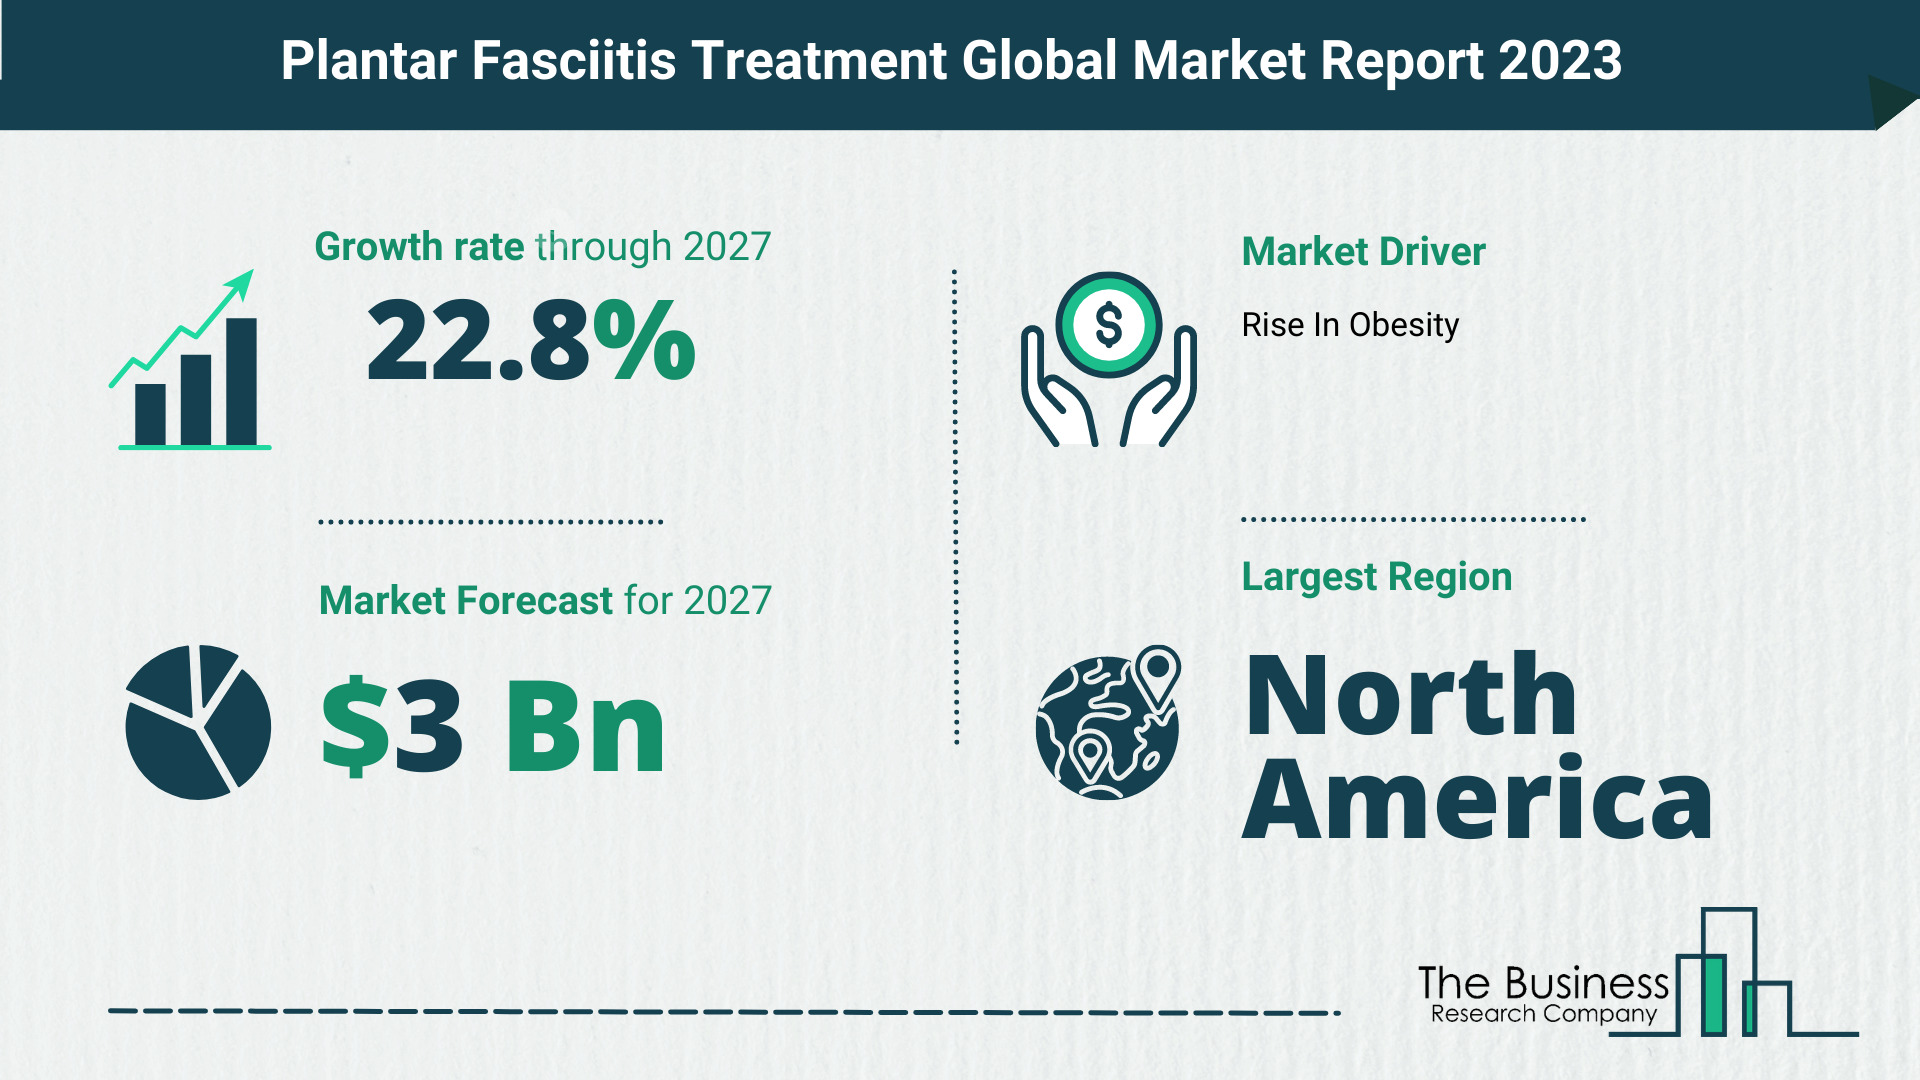 What Will The Plantar Fasciitis Treatment Market Look Like In 2023?